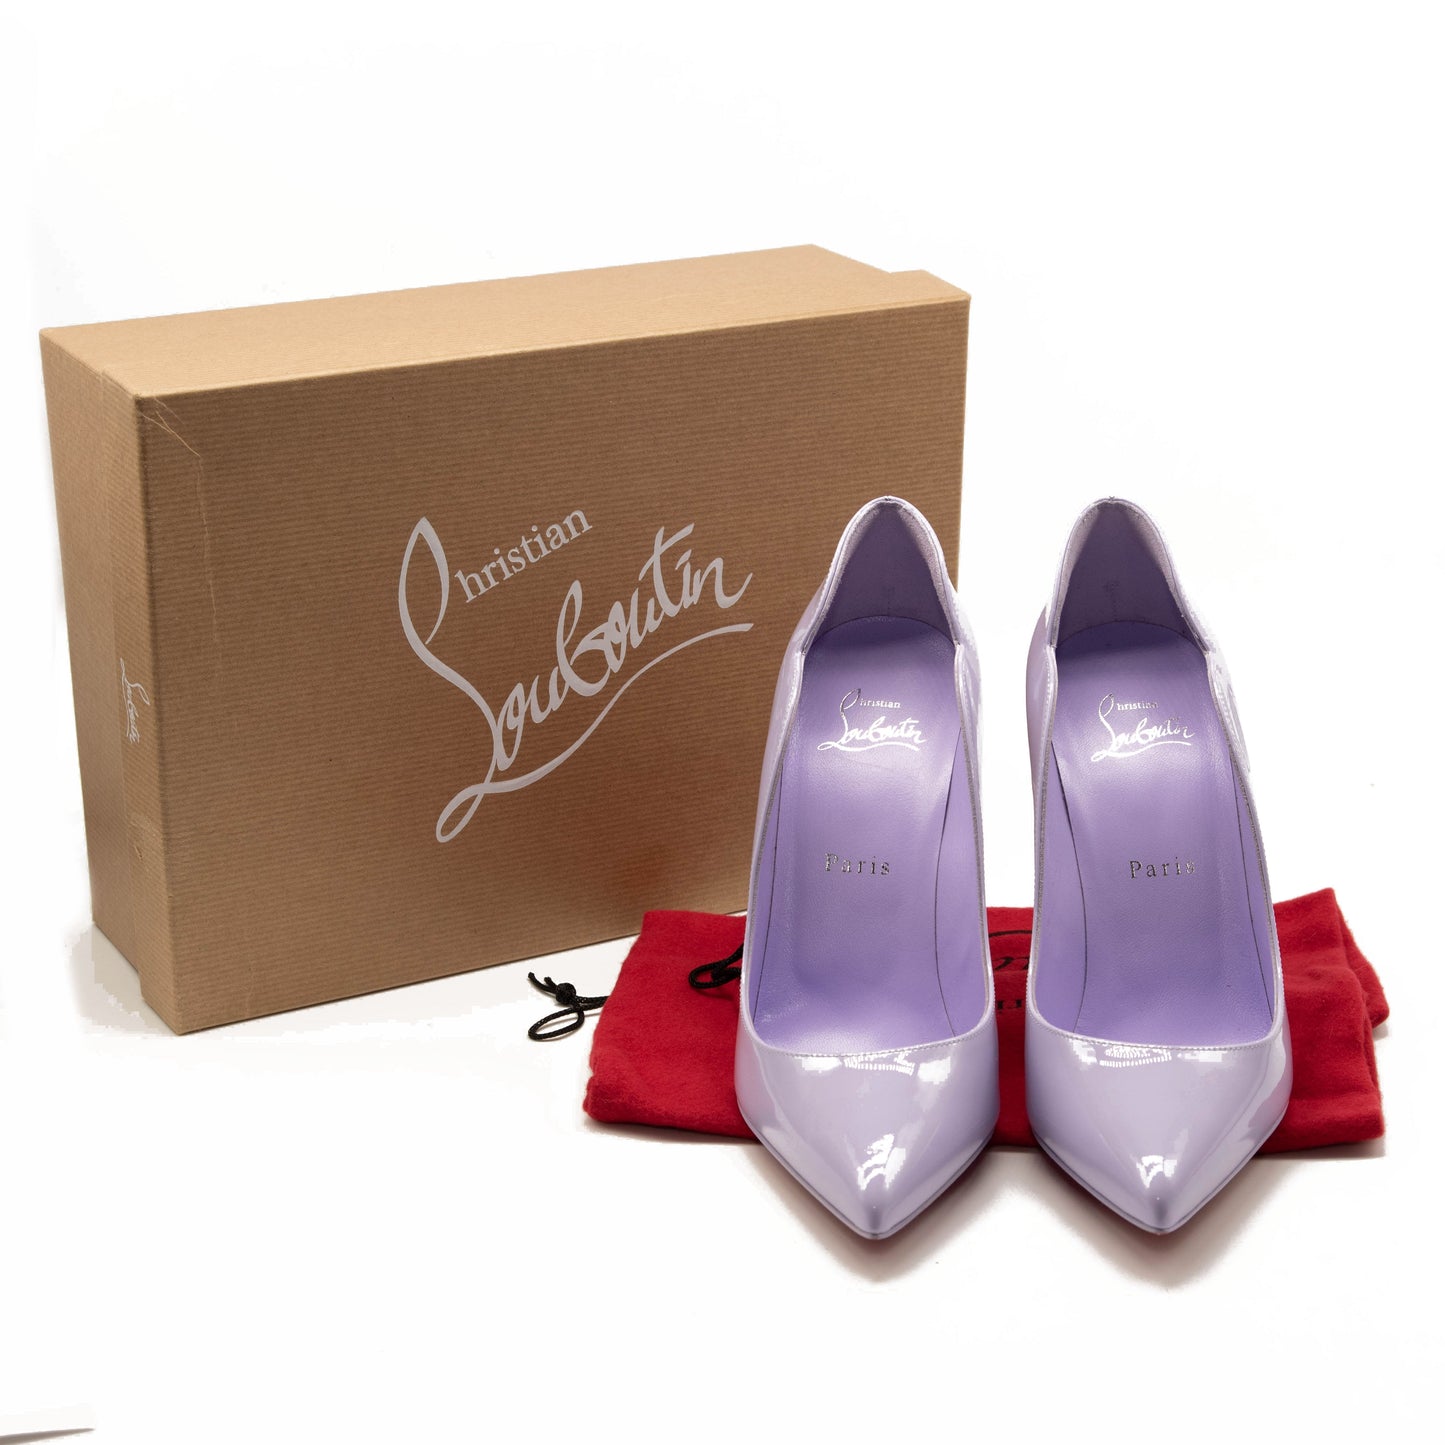 NEW Christian Louboutin Hot Chick Scallop Pointed Toe Pump Lilac EU 39